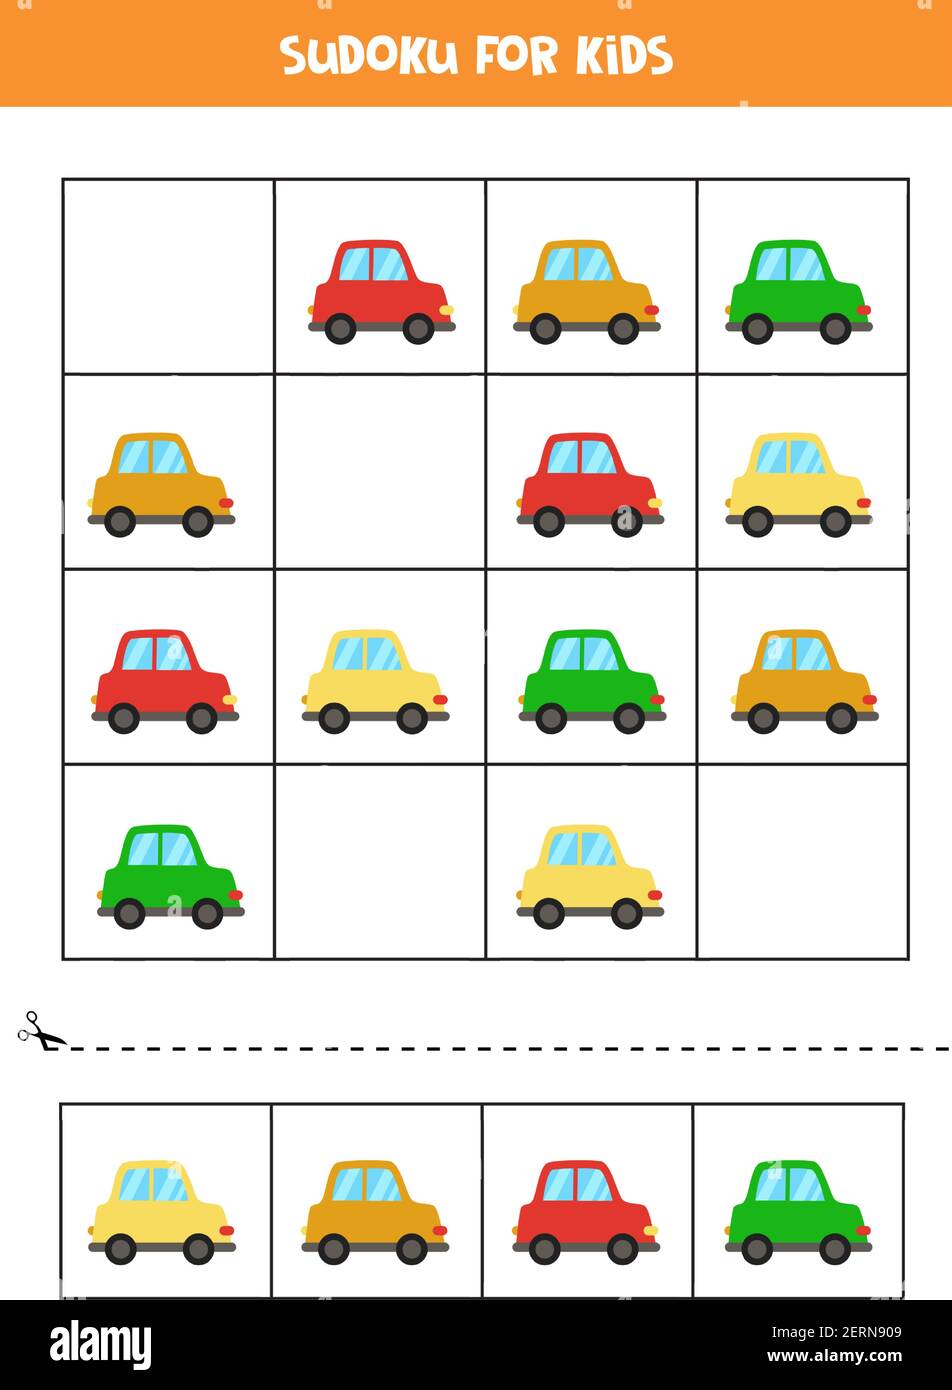 Sudoku for preschool kids. Logical game with colorful cartoon cars. Stock Vector